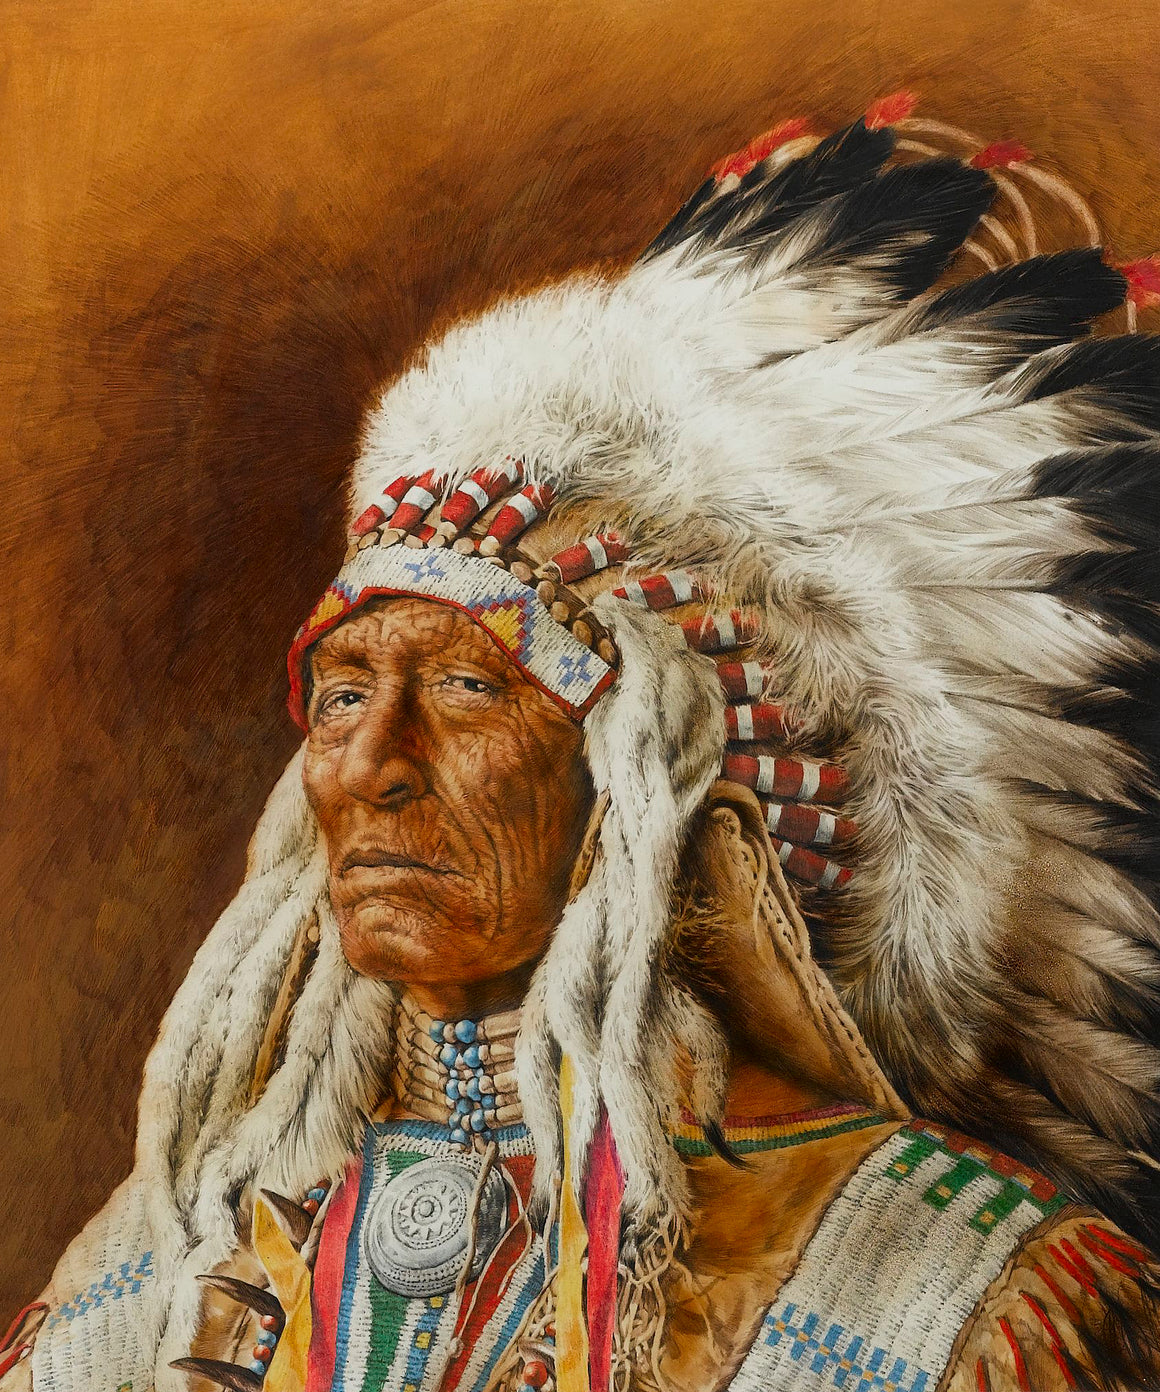 "Legends of the West - Indian Chief" by Chris Calle, Mixed Media Painting on Illustration Board